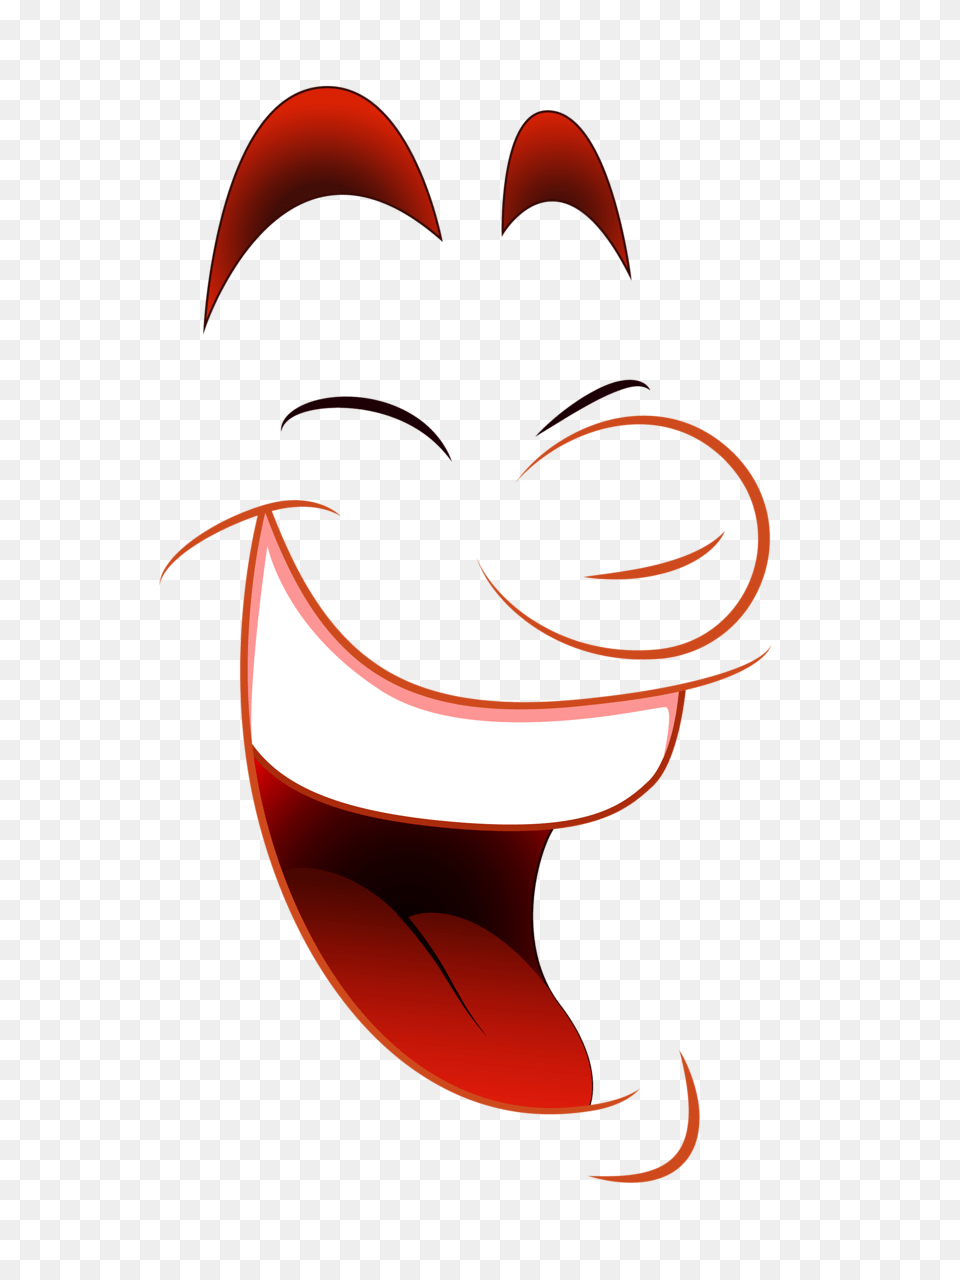 Crack Smiley Emoticon And Cartoon Faces, Art Png